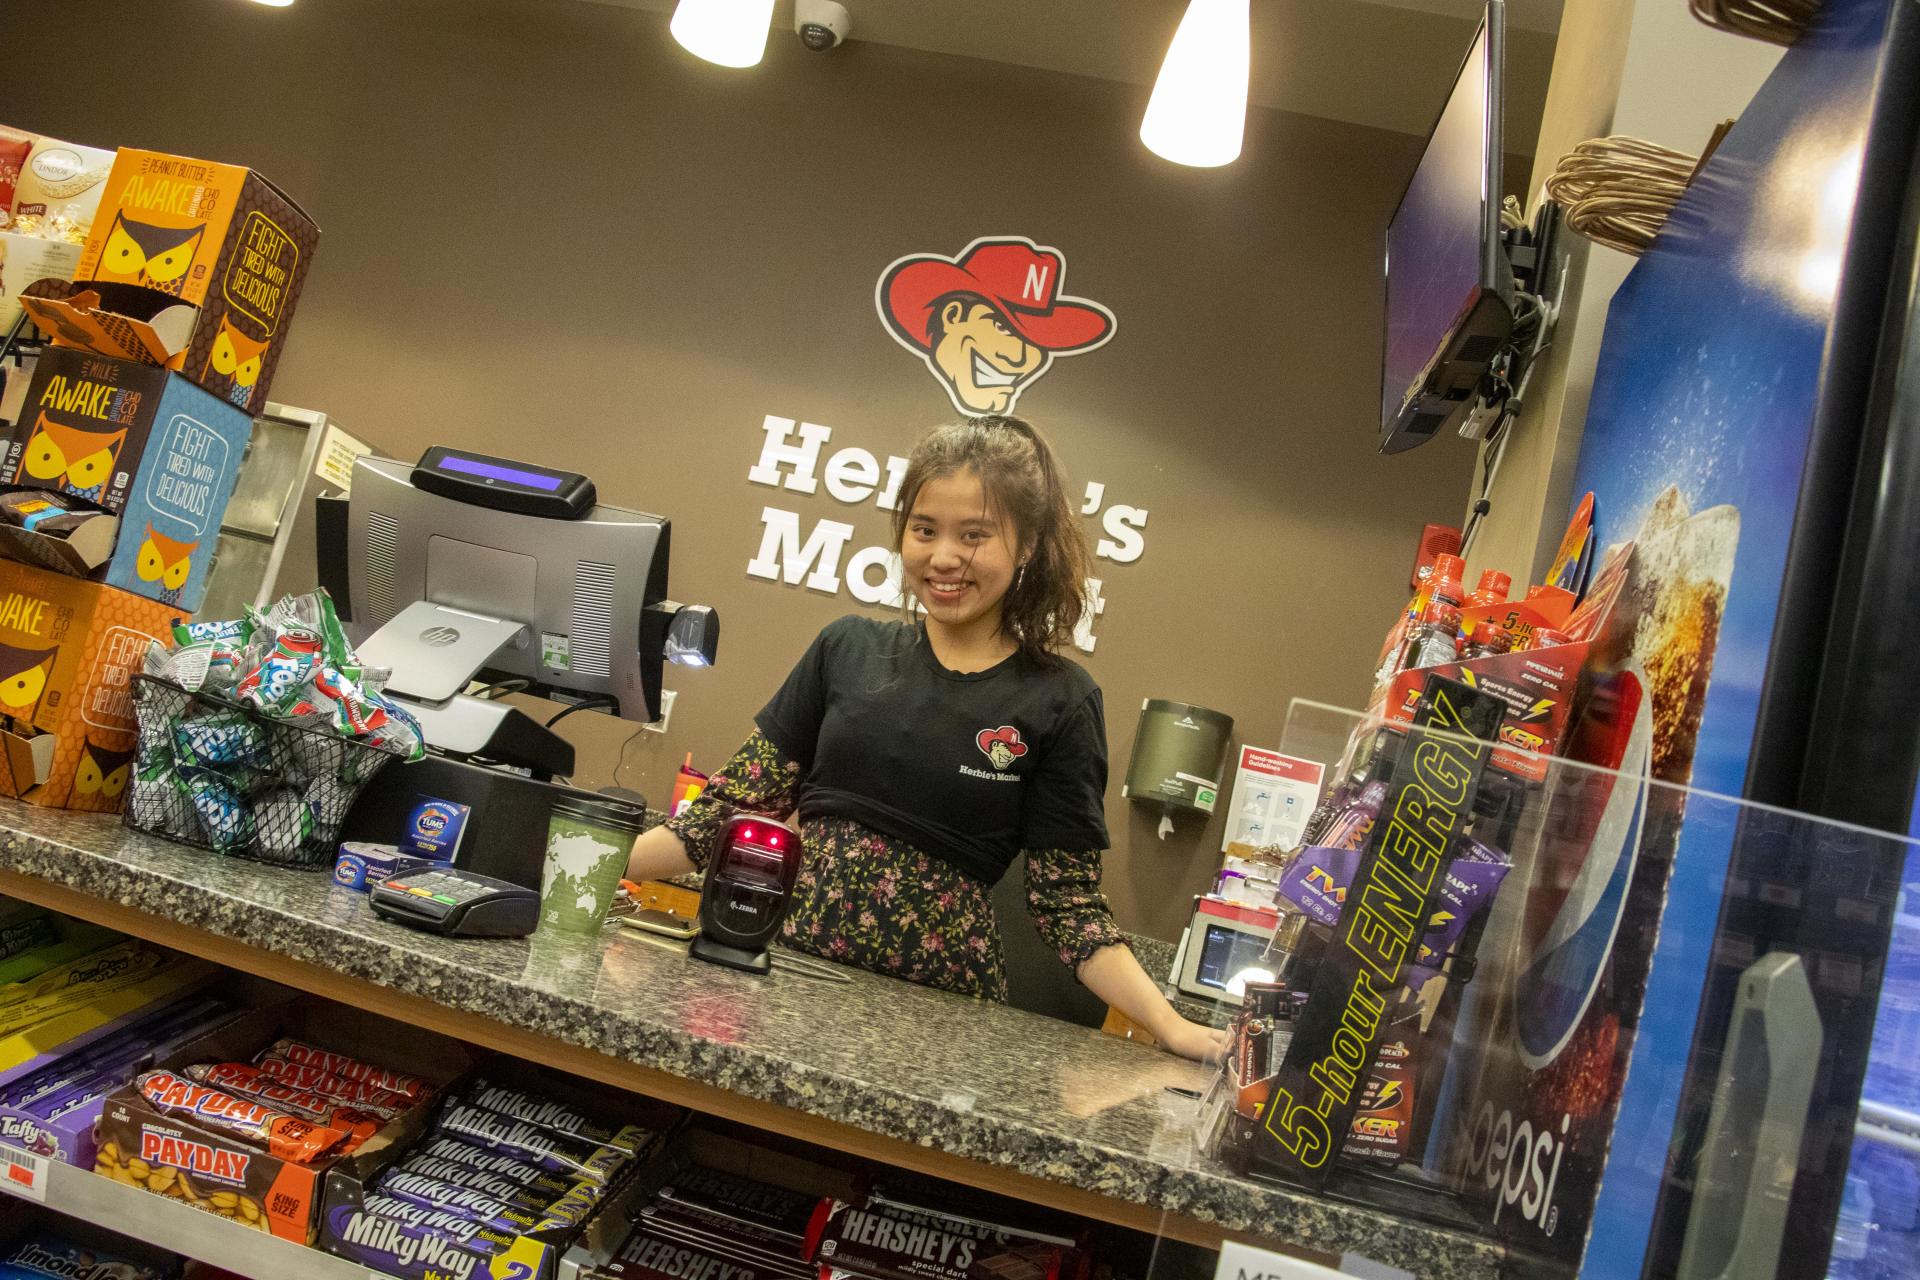 Dining student employee Linh Tran behind the counter at Herbie's Market at Abel